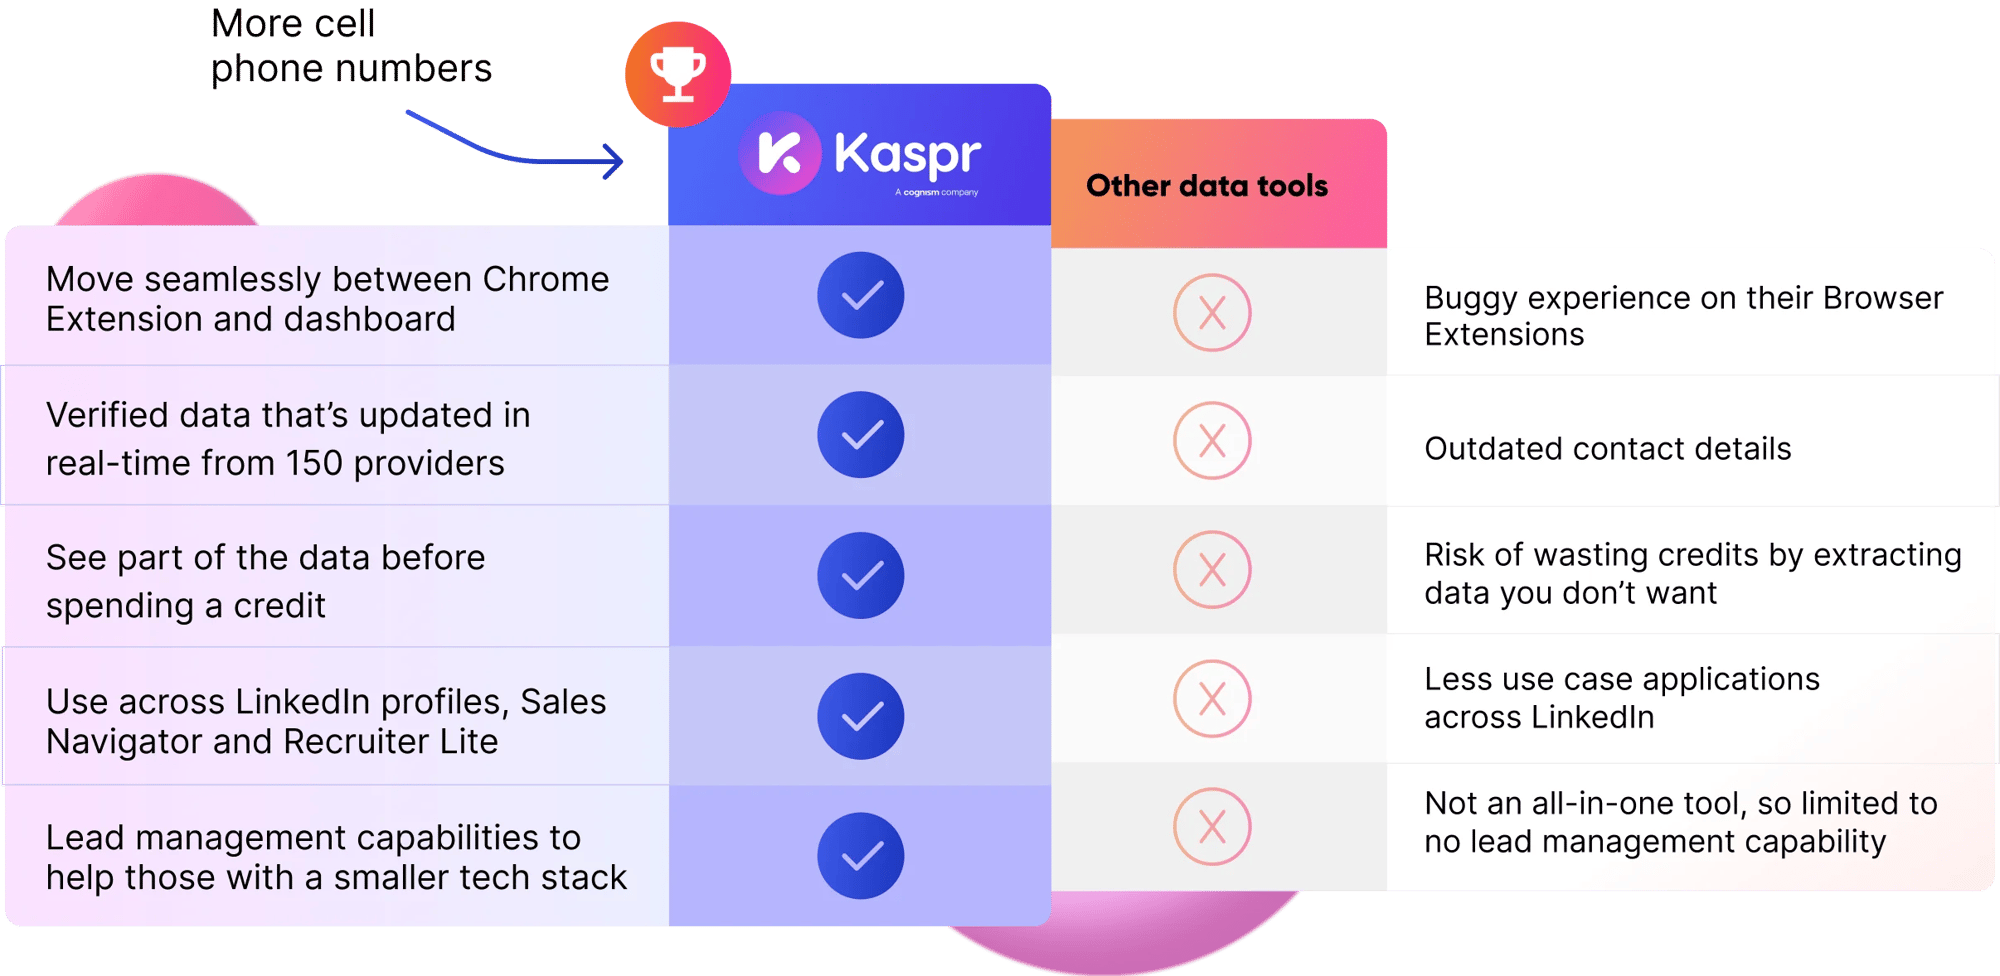 Kaspr vs. other data tools graphic